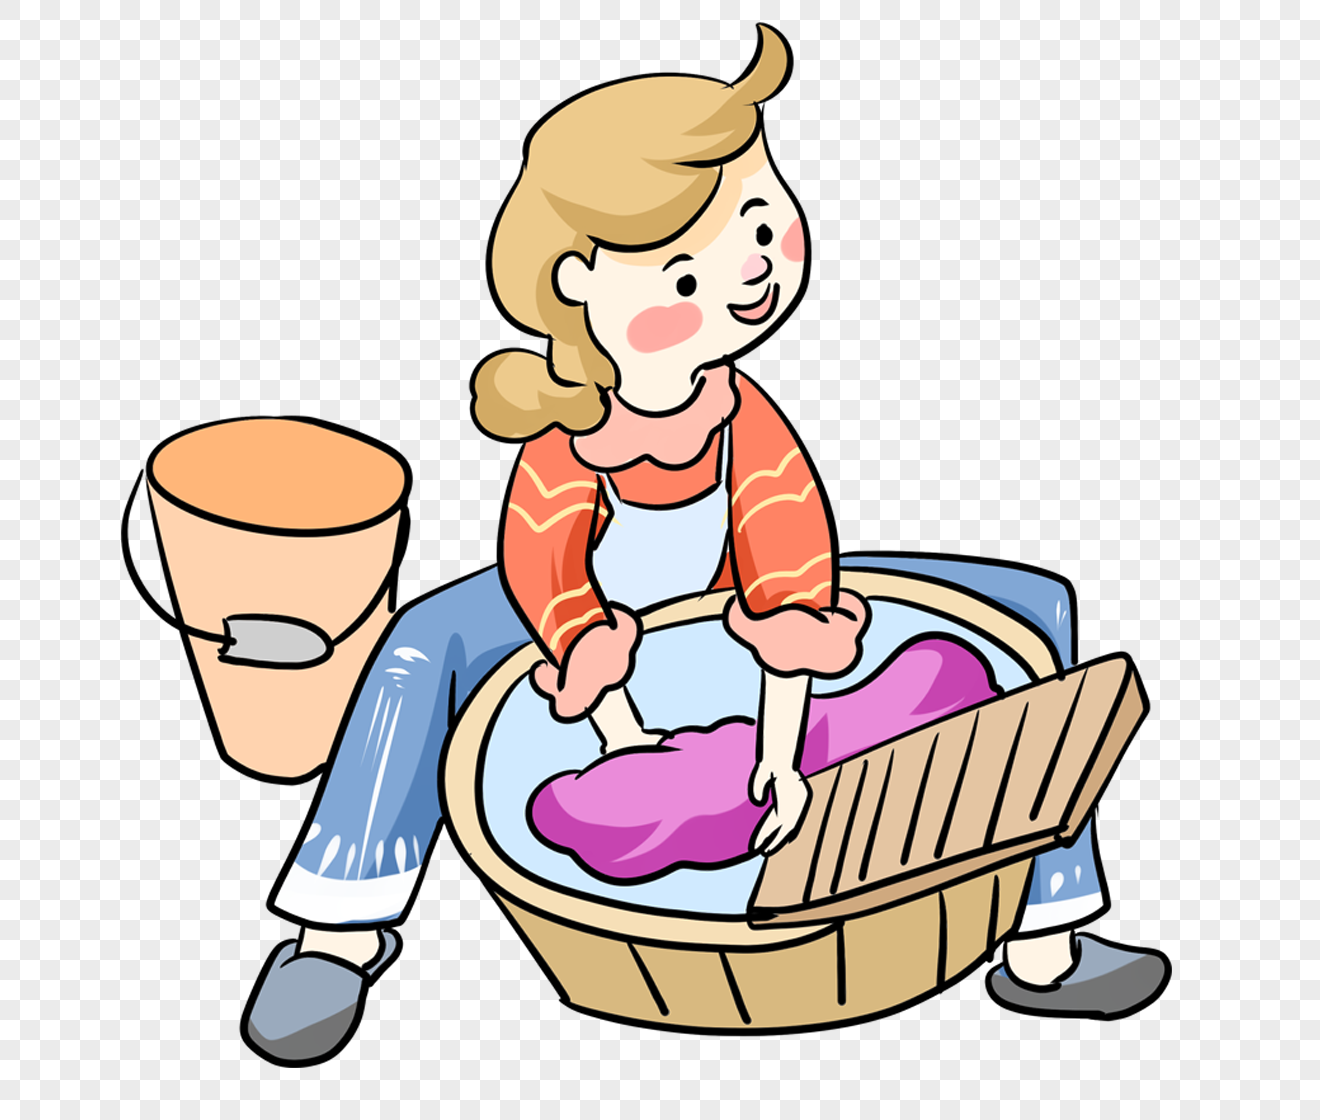 Mother Wash Clothes PNG Image & PSD File Free Download - Lovepik ...